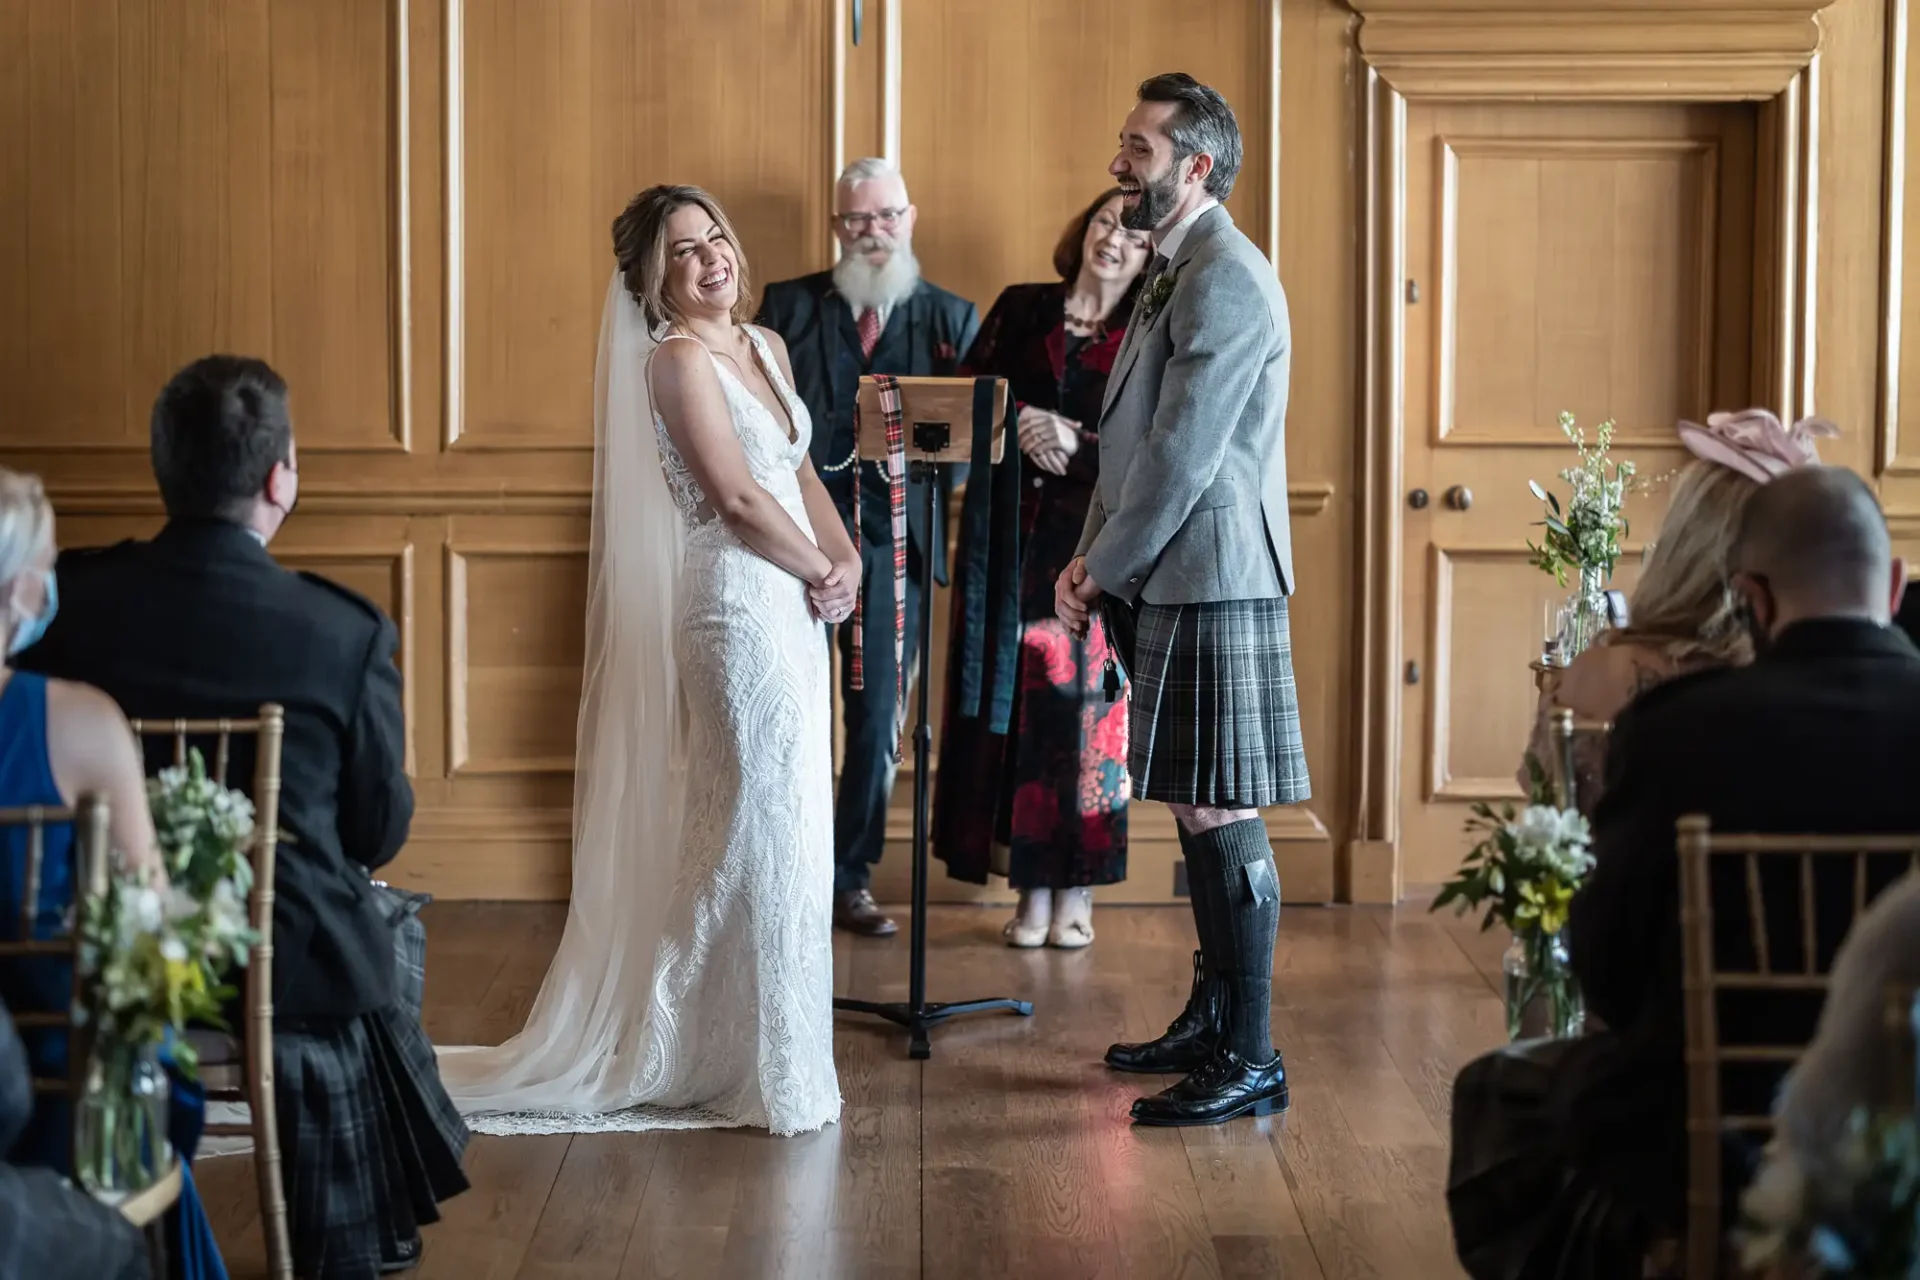 Bride and groom smiling at each other during a wedding ceremony, with the groom wearing a kilt, in a room with wooden paneling and seated guests.